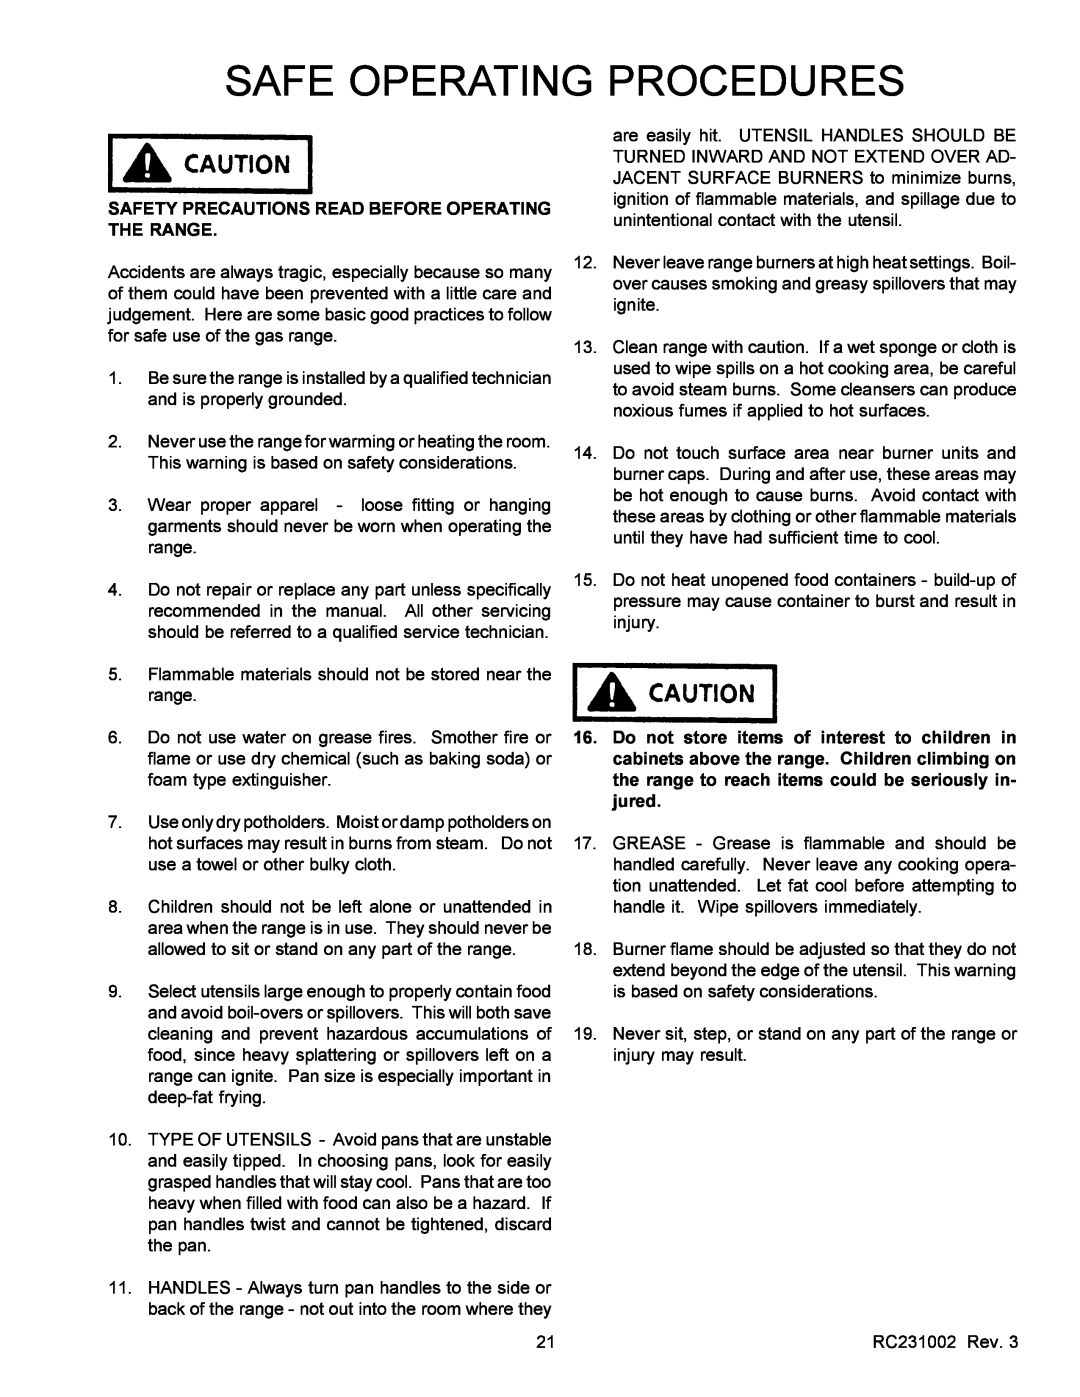 Amana RSS, RST service manual Safe Operating Procedures, Safety Precautions Read Before Operating The Range 